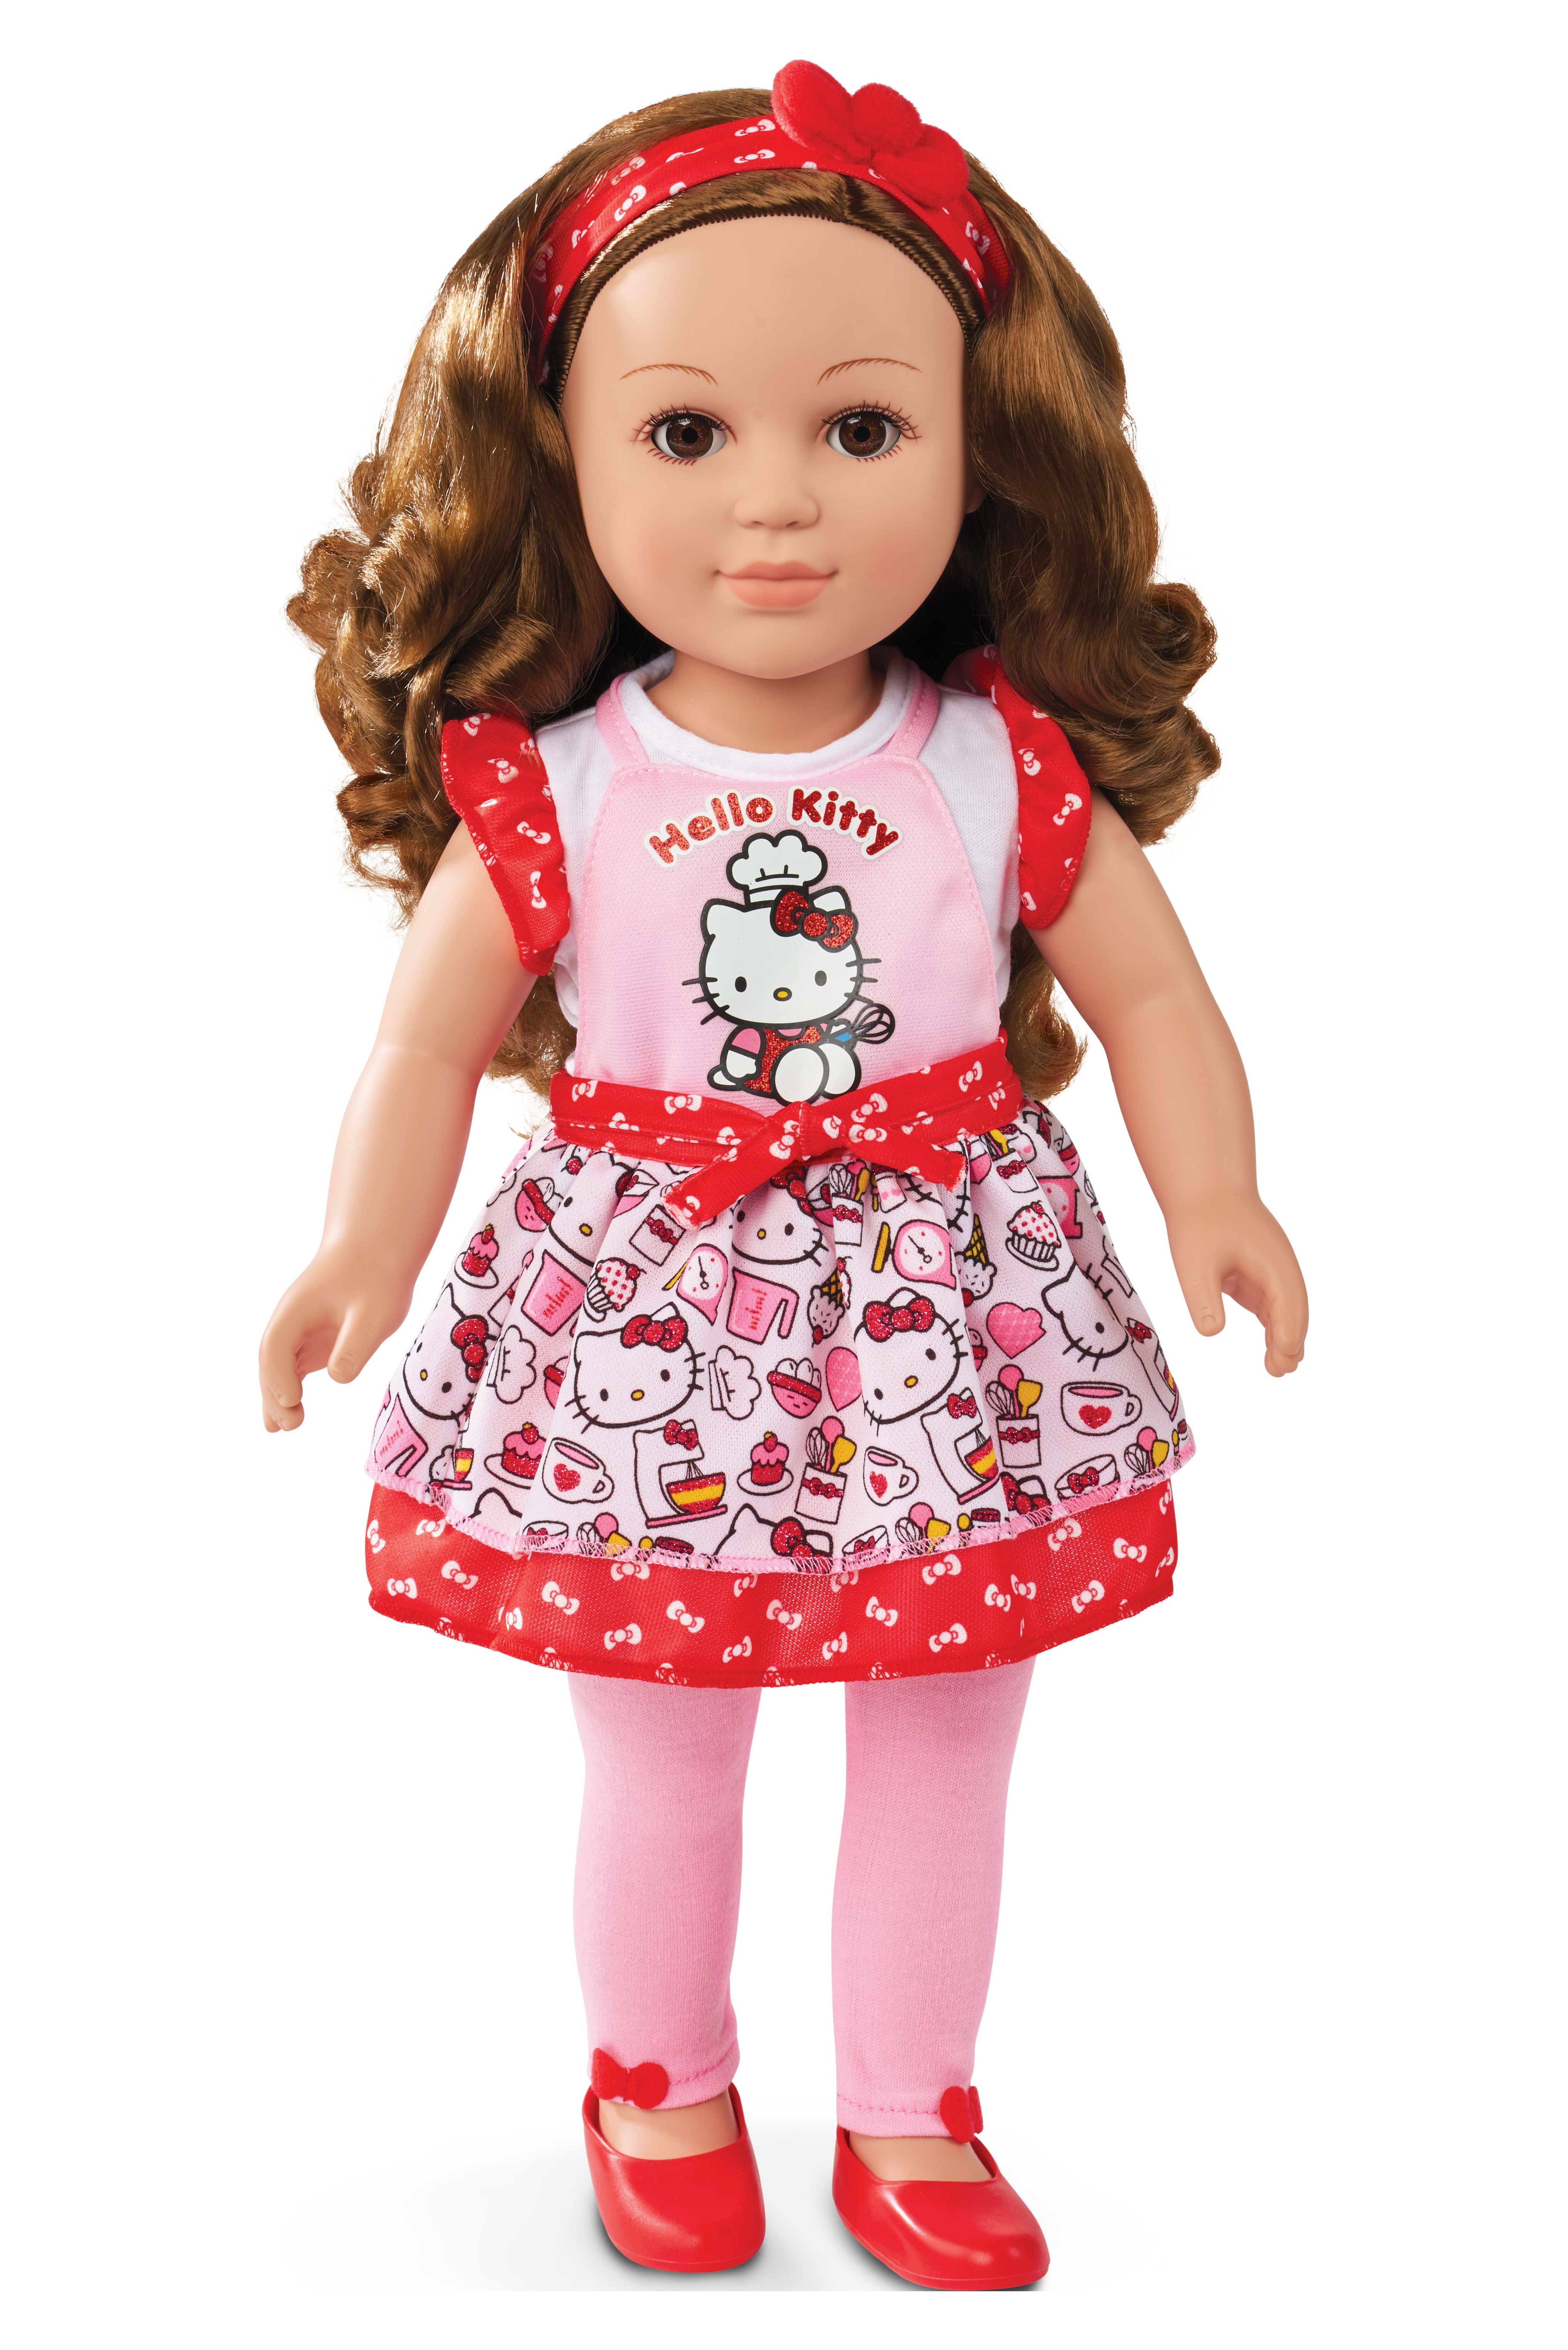 My Life As Poseable Hello Kitty Baker 18inch Doll, Brunette Hair, Brown Eyes - image 1 of 8